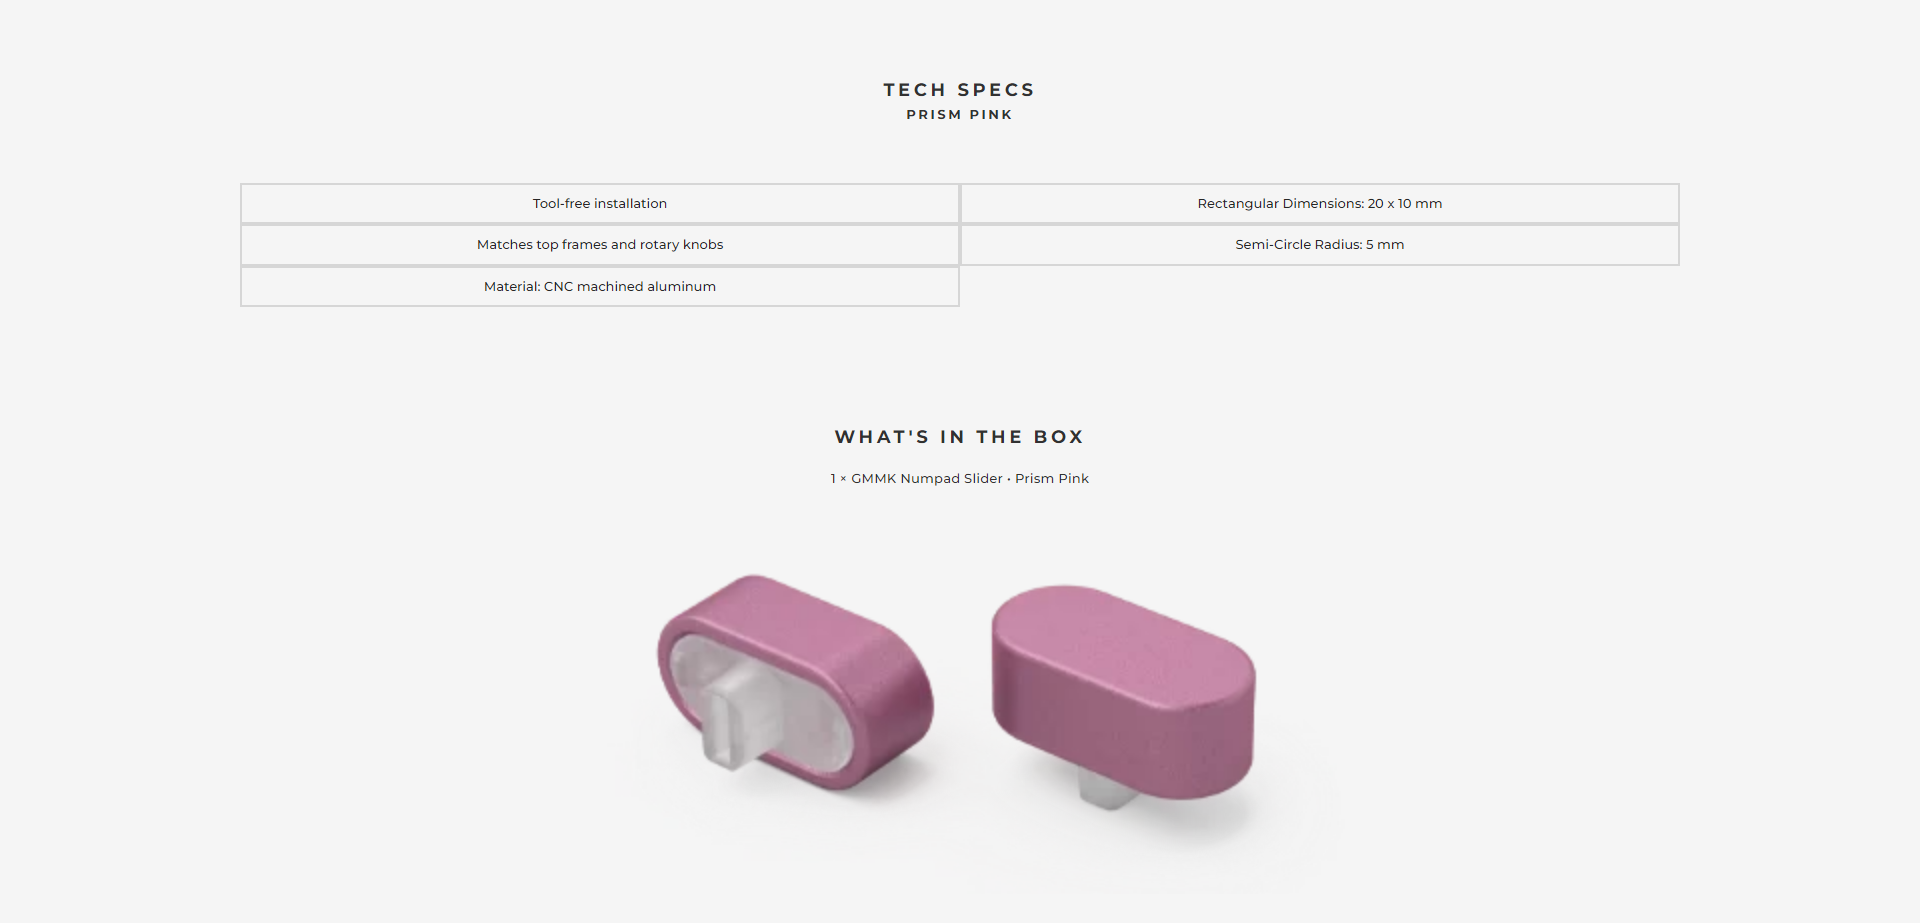 A large marketing image providing additional information about the product Glorious GMMK Numpad Slider - Prism Pink - Additional alt info not provided